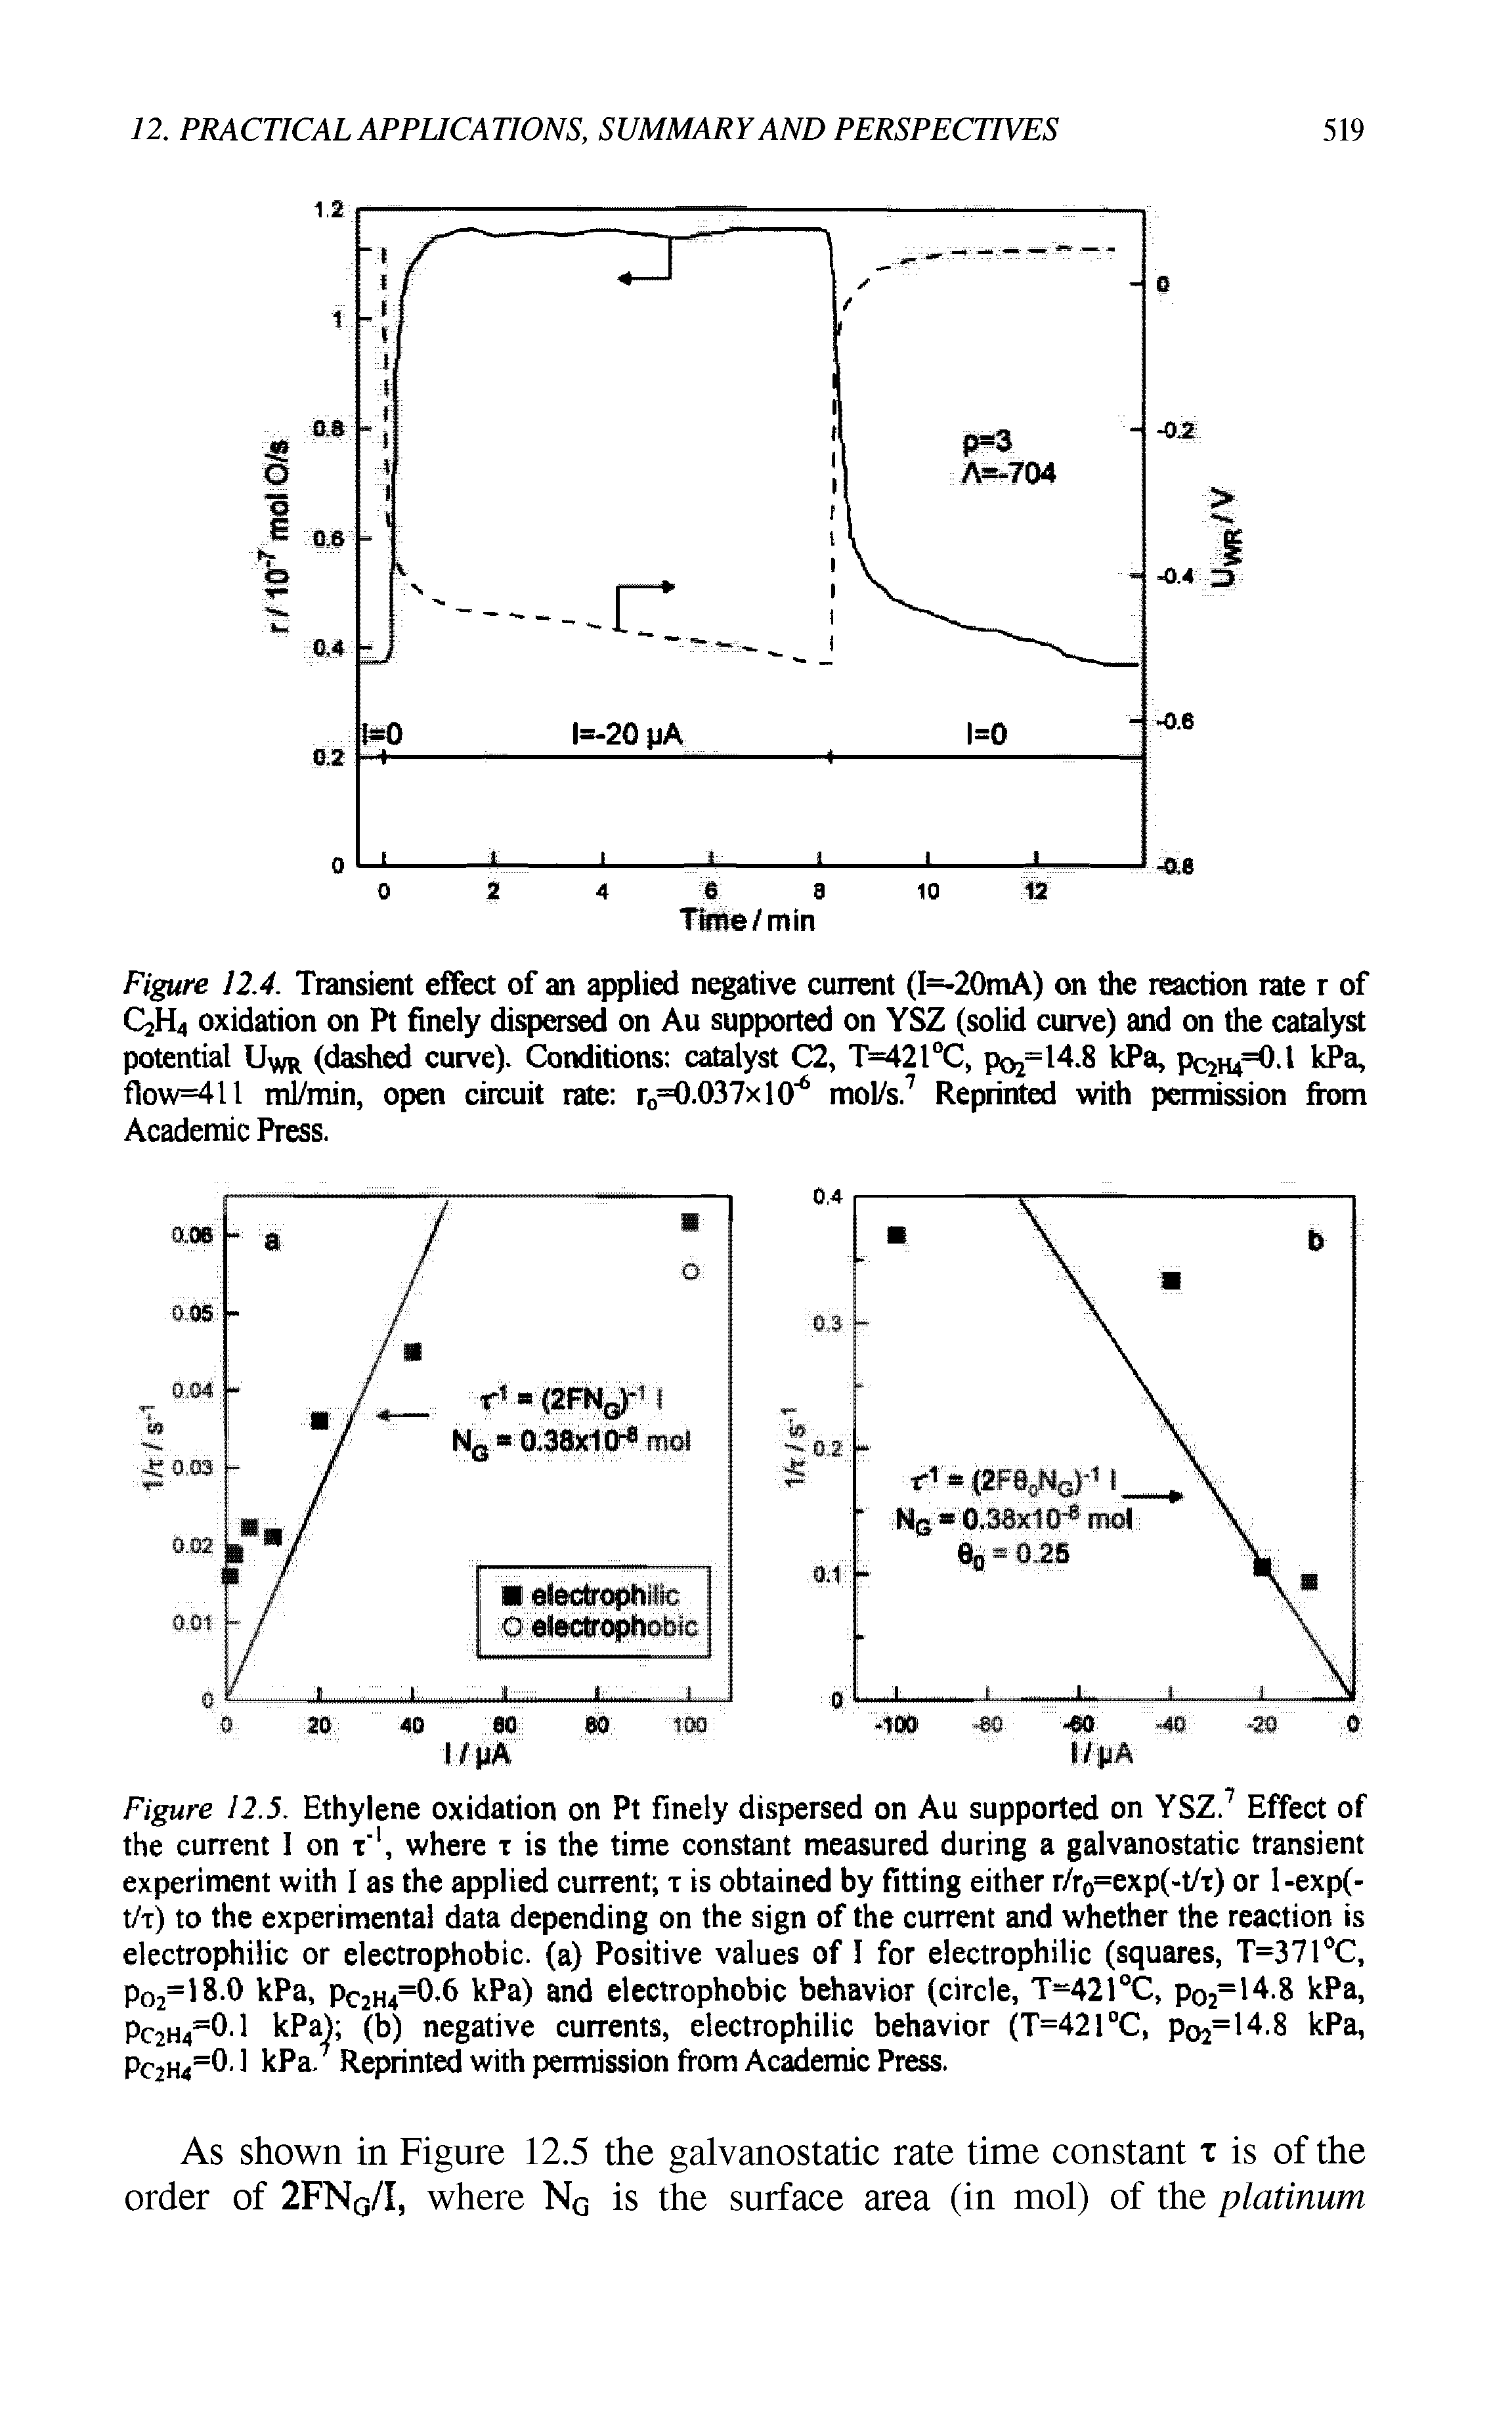 Figure 12.4. Transient effect of an applied negative current (I=-20mA) on the reaction rate r of CyT, oxidation on Pt finely dispersed on Au supported on YSZ (solid curve) and on the catalyst potential Uwr (dashed curve). Conditions catalyst C2, T=42l°C, po2=14.8 kPa, pc2H4=0.l kPa, fiow=411 ml/min, open circuit rate ro=0.037xl0 6 mol/s.7 Reprinted with permission from Academic Press.